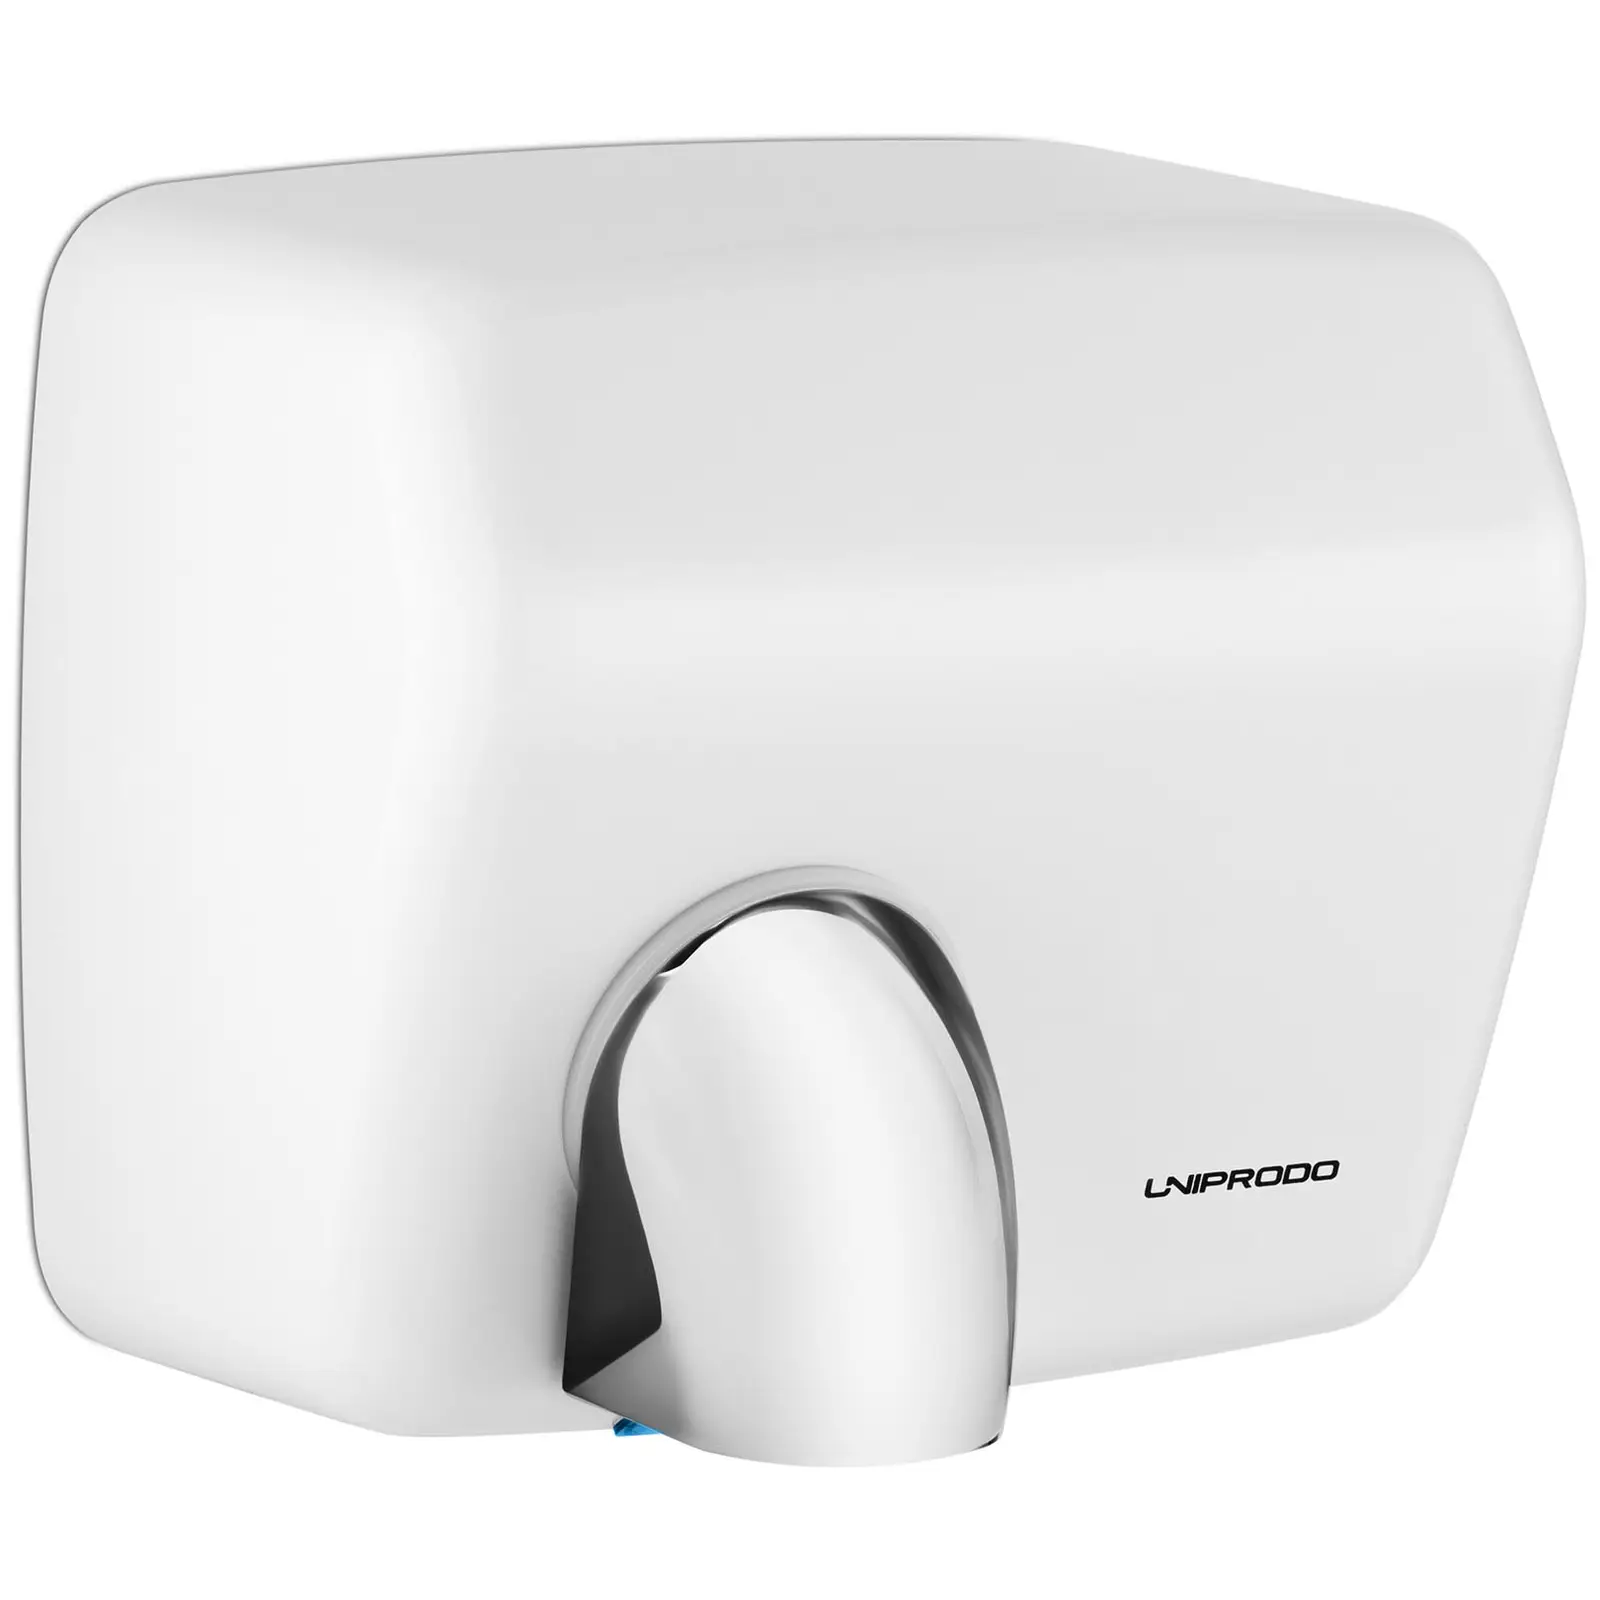 Hand Dryer - Electric - 1,800 W - 360 ° Air Nozzle